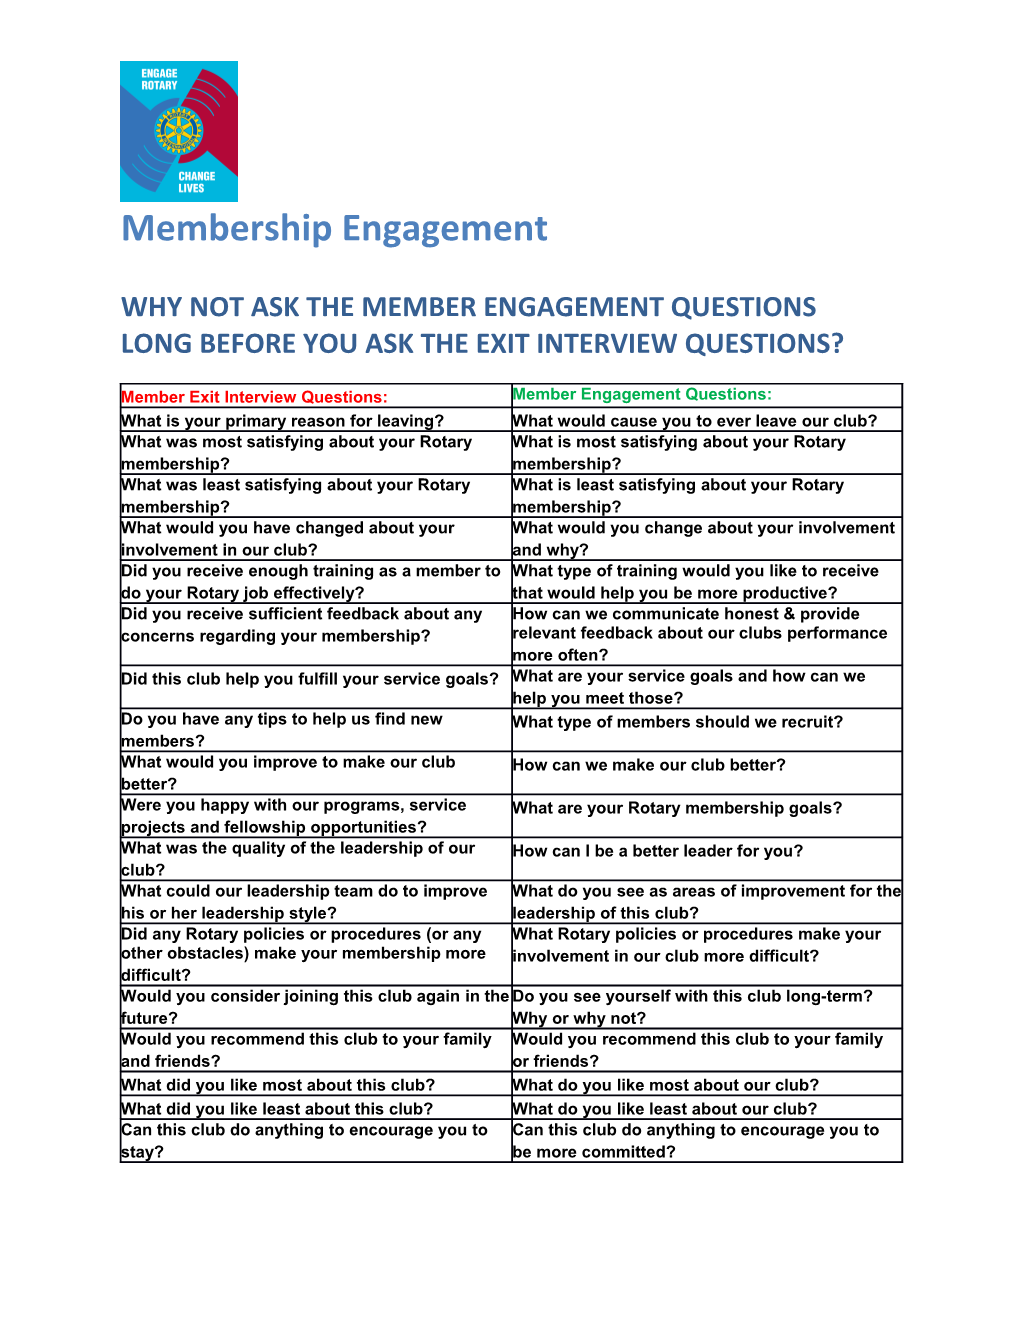 Why Not Ask the Member Engagement Questions